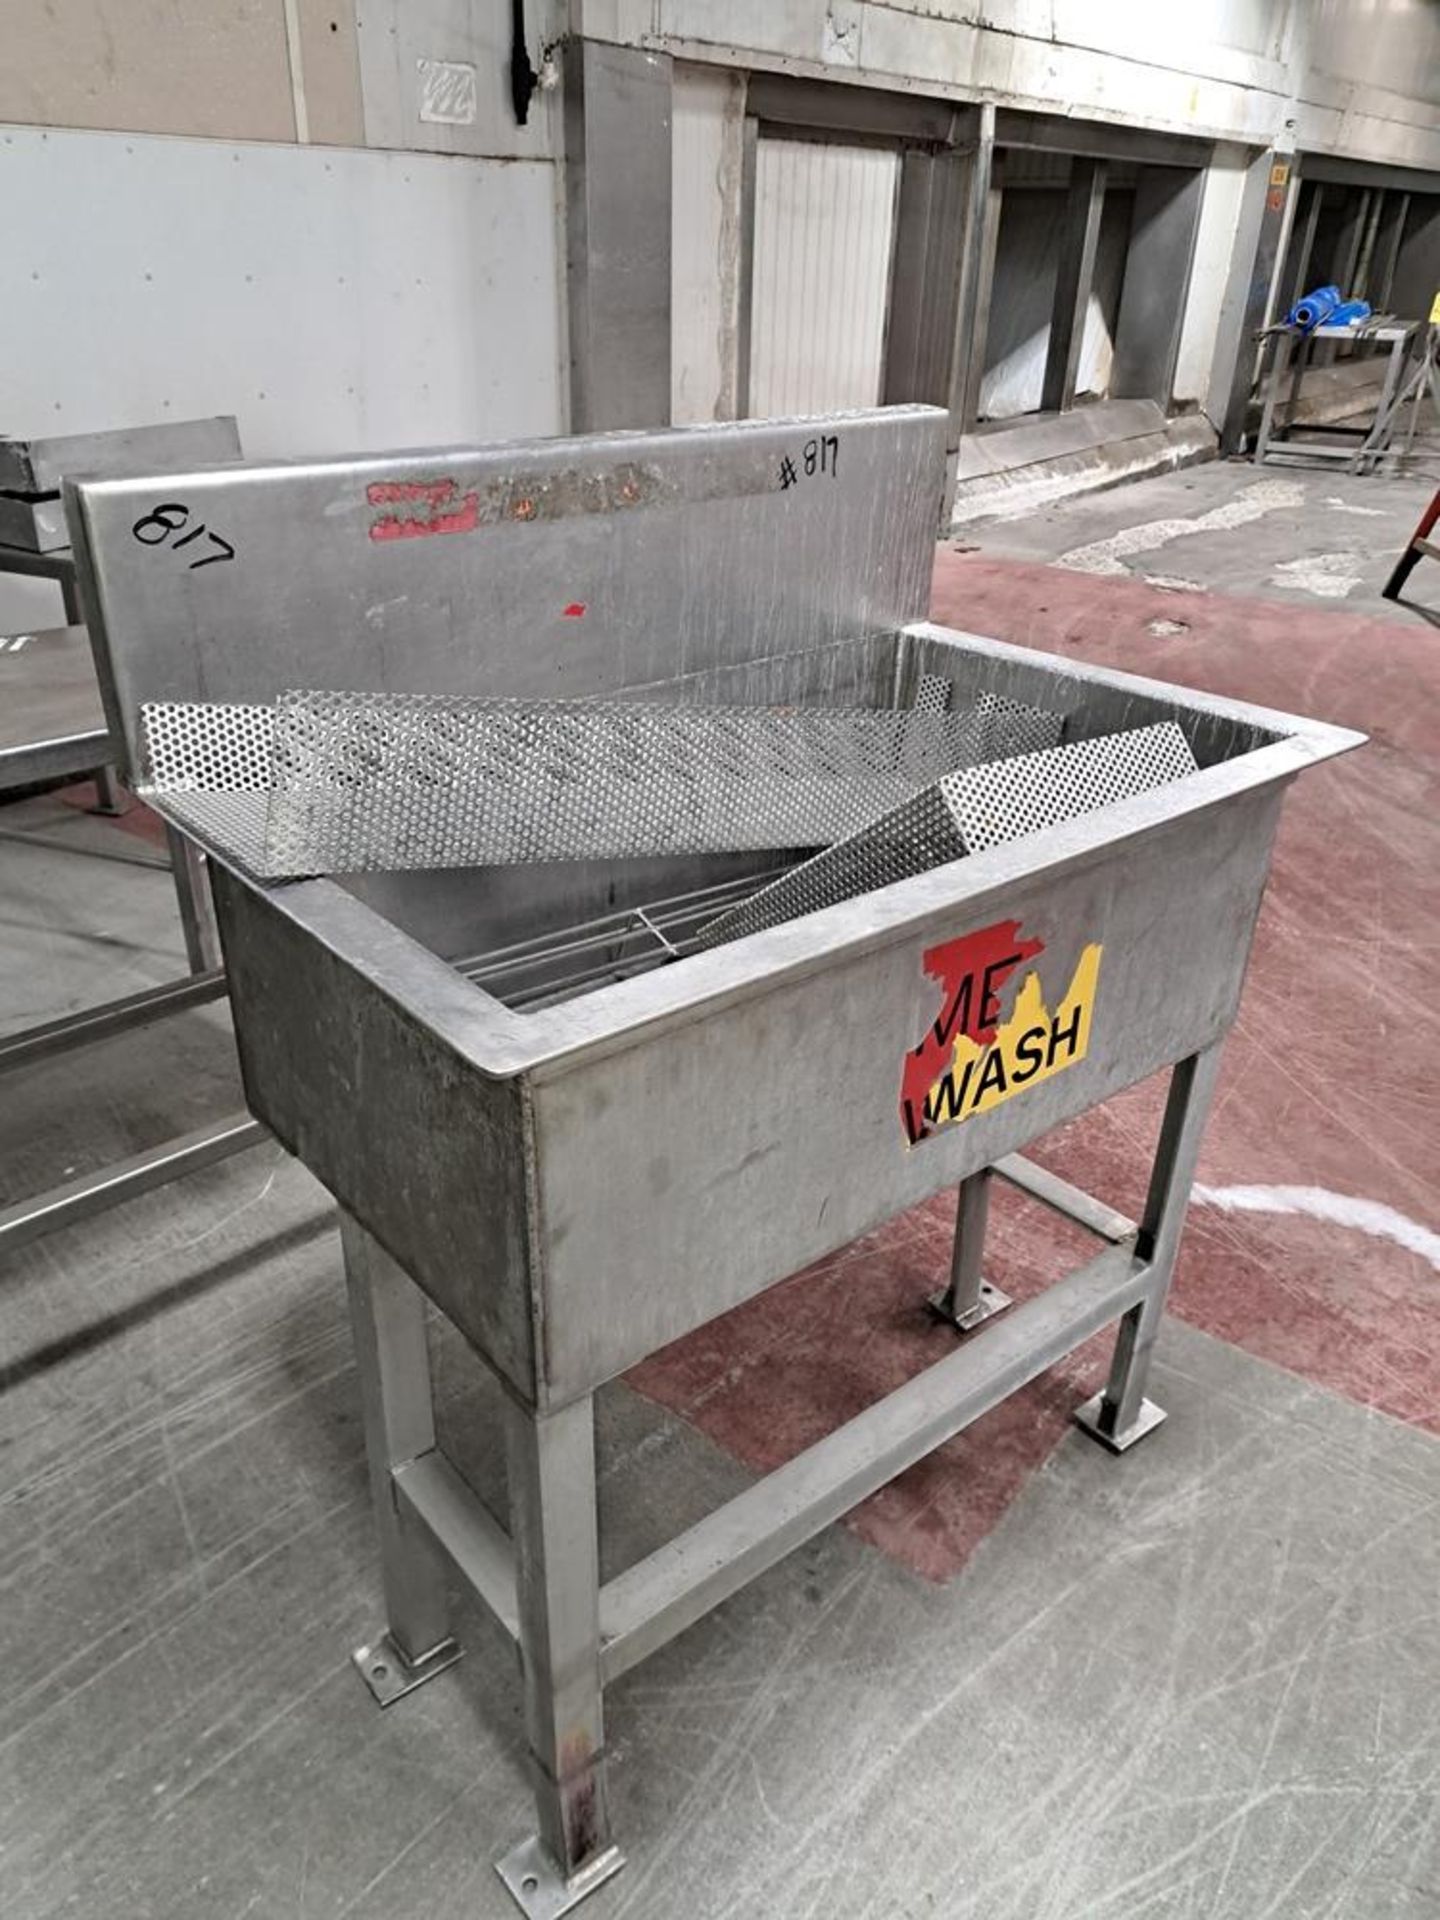 Lot Stainless Steel Meat Wash, (3) Stainless Steel Tables: Required Loading Fee $200.00, Rigger-Norm - Image 2 of 7